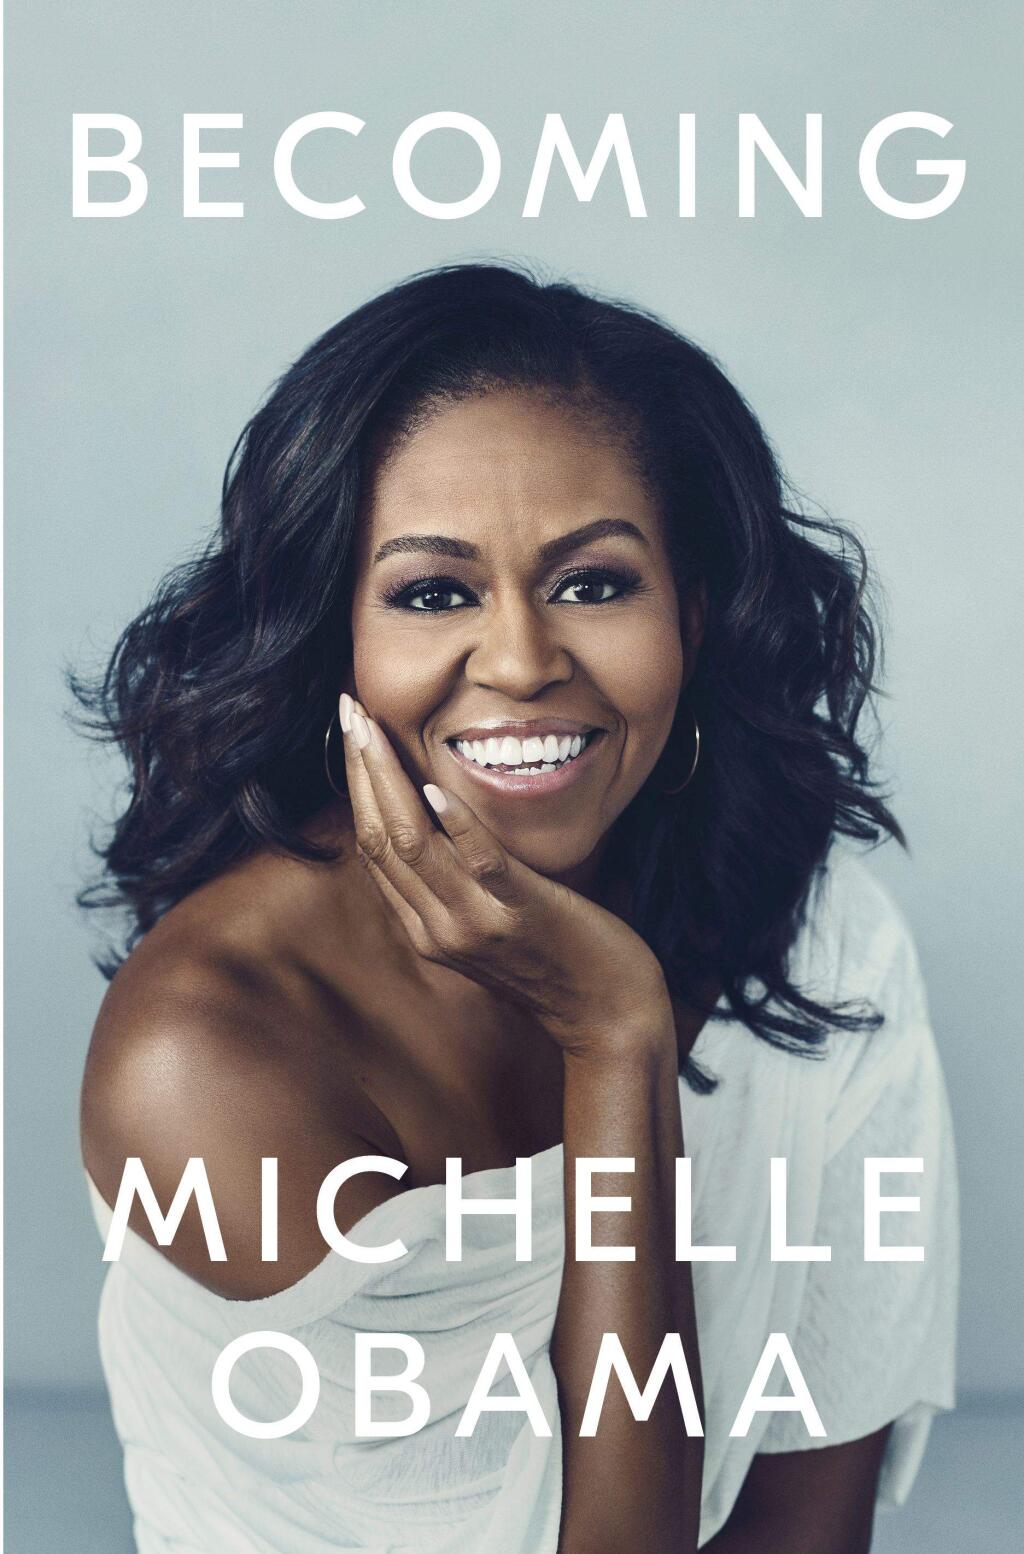 FIRST LADY: Michelle Obama's memoir is No. 1 on the local bestselling fiction and nonfiction books list.